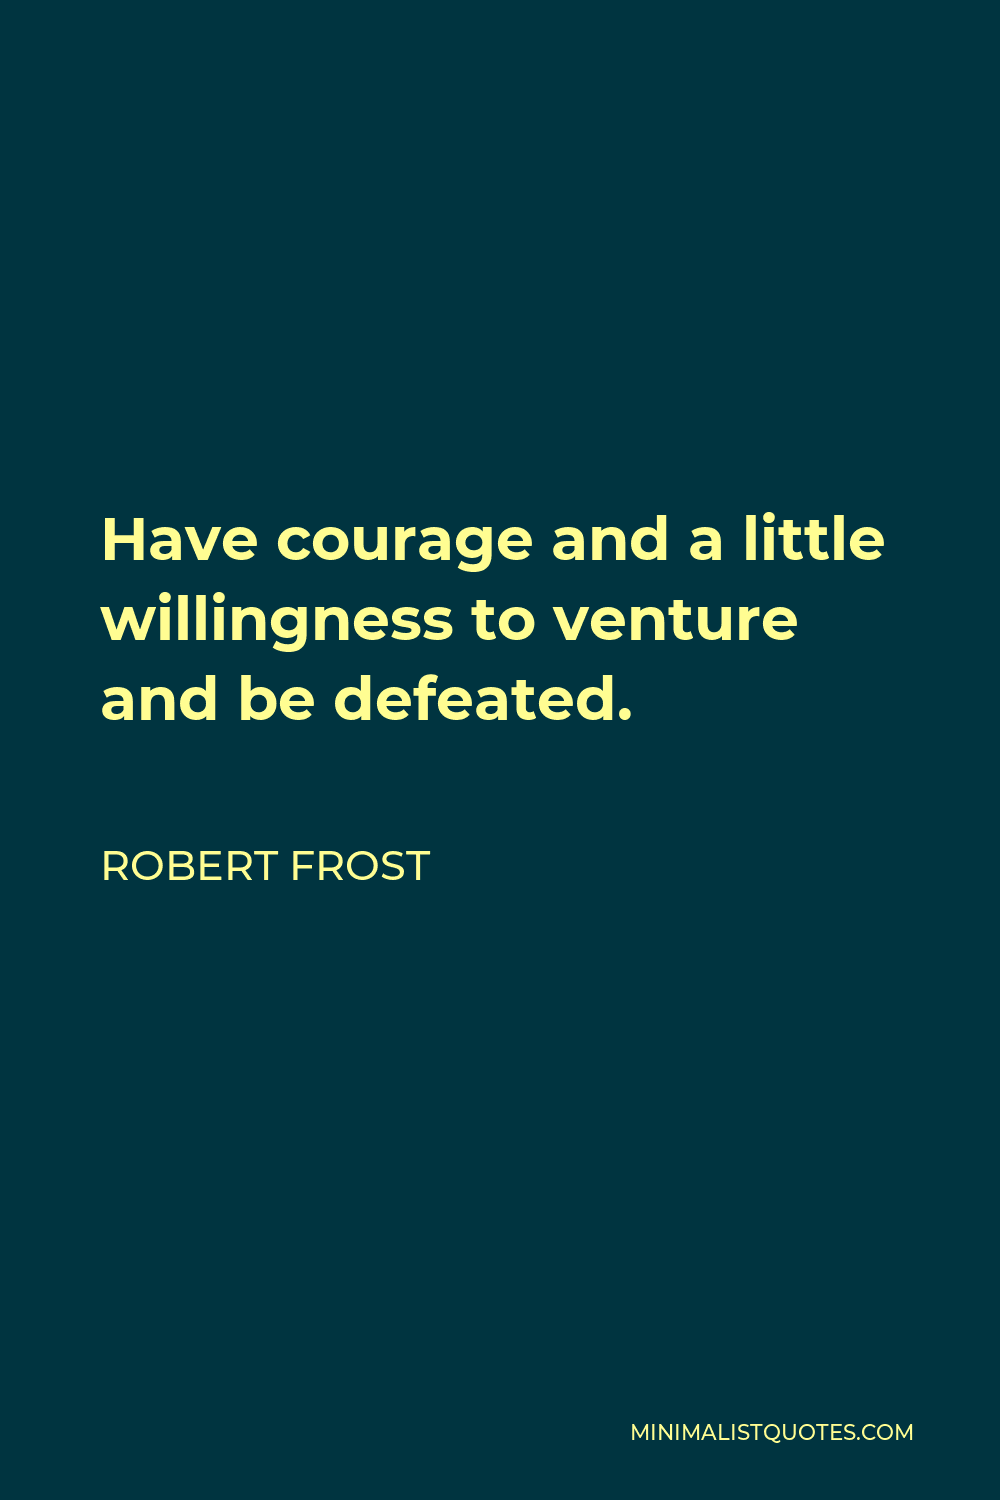 Robert Frost Quote - Have courage and a little willingness to venture and be defeated.